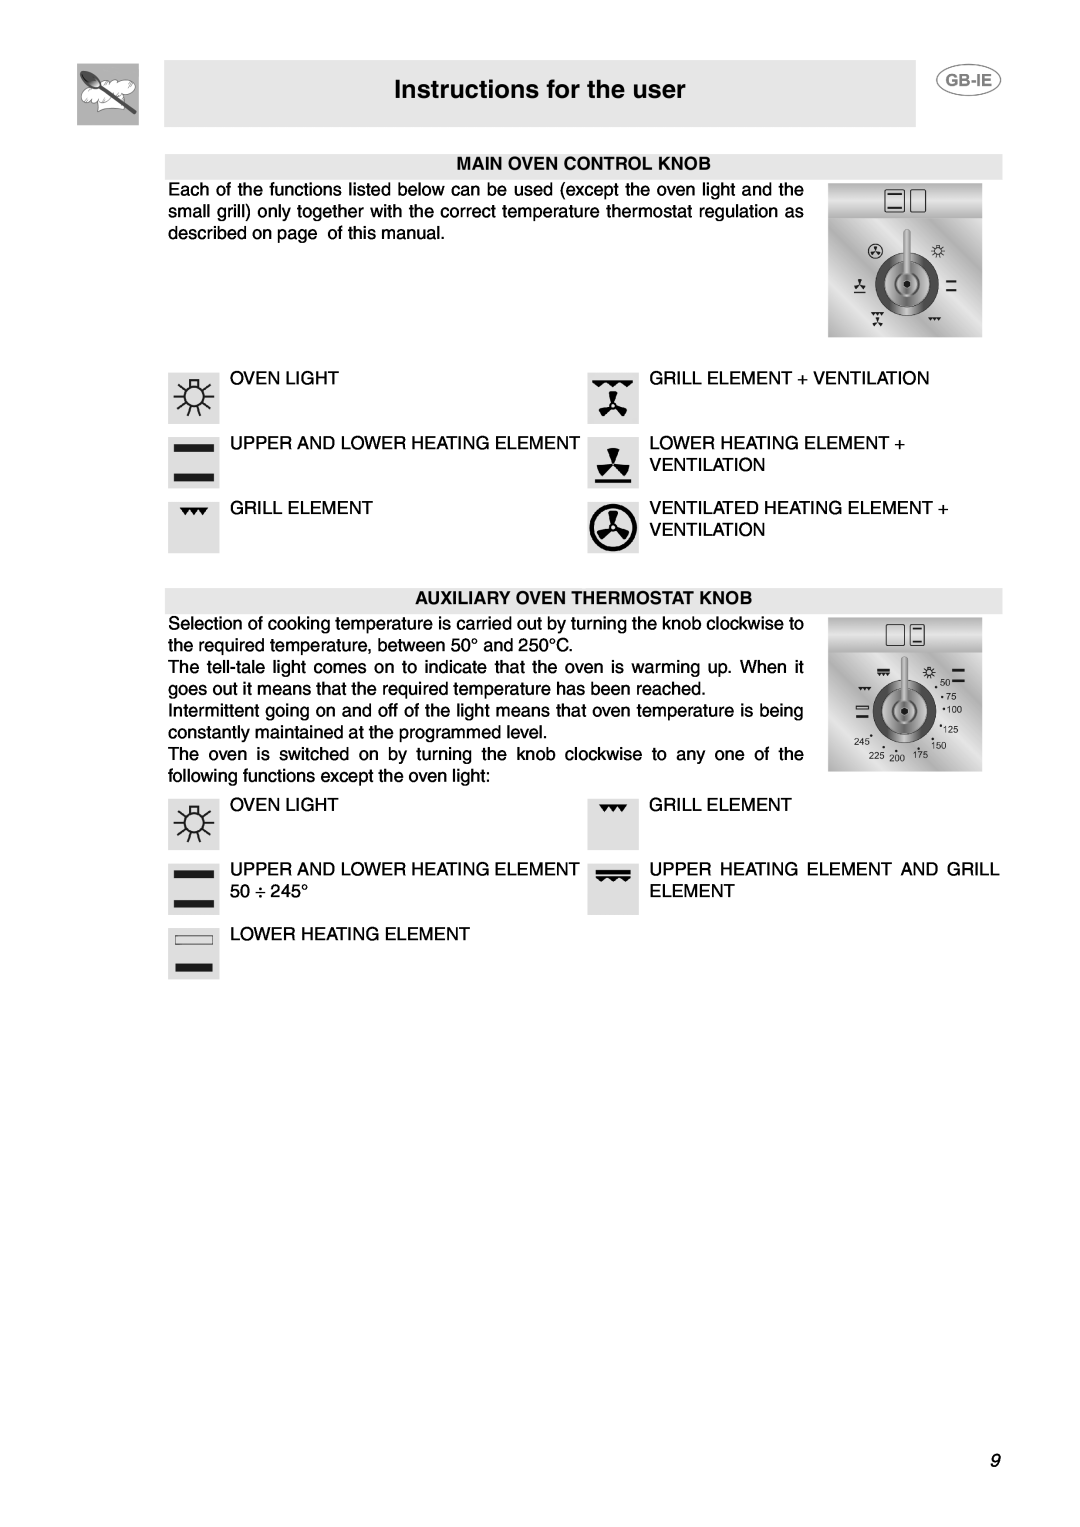 Smeg CC92MFX6, CC92MFX5 manual Instructions for the user, Main Oven Control Knob, Auxiliary Oven Thermostat Knob 